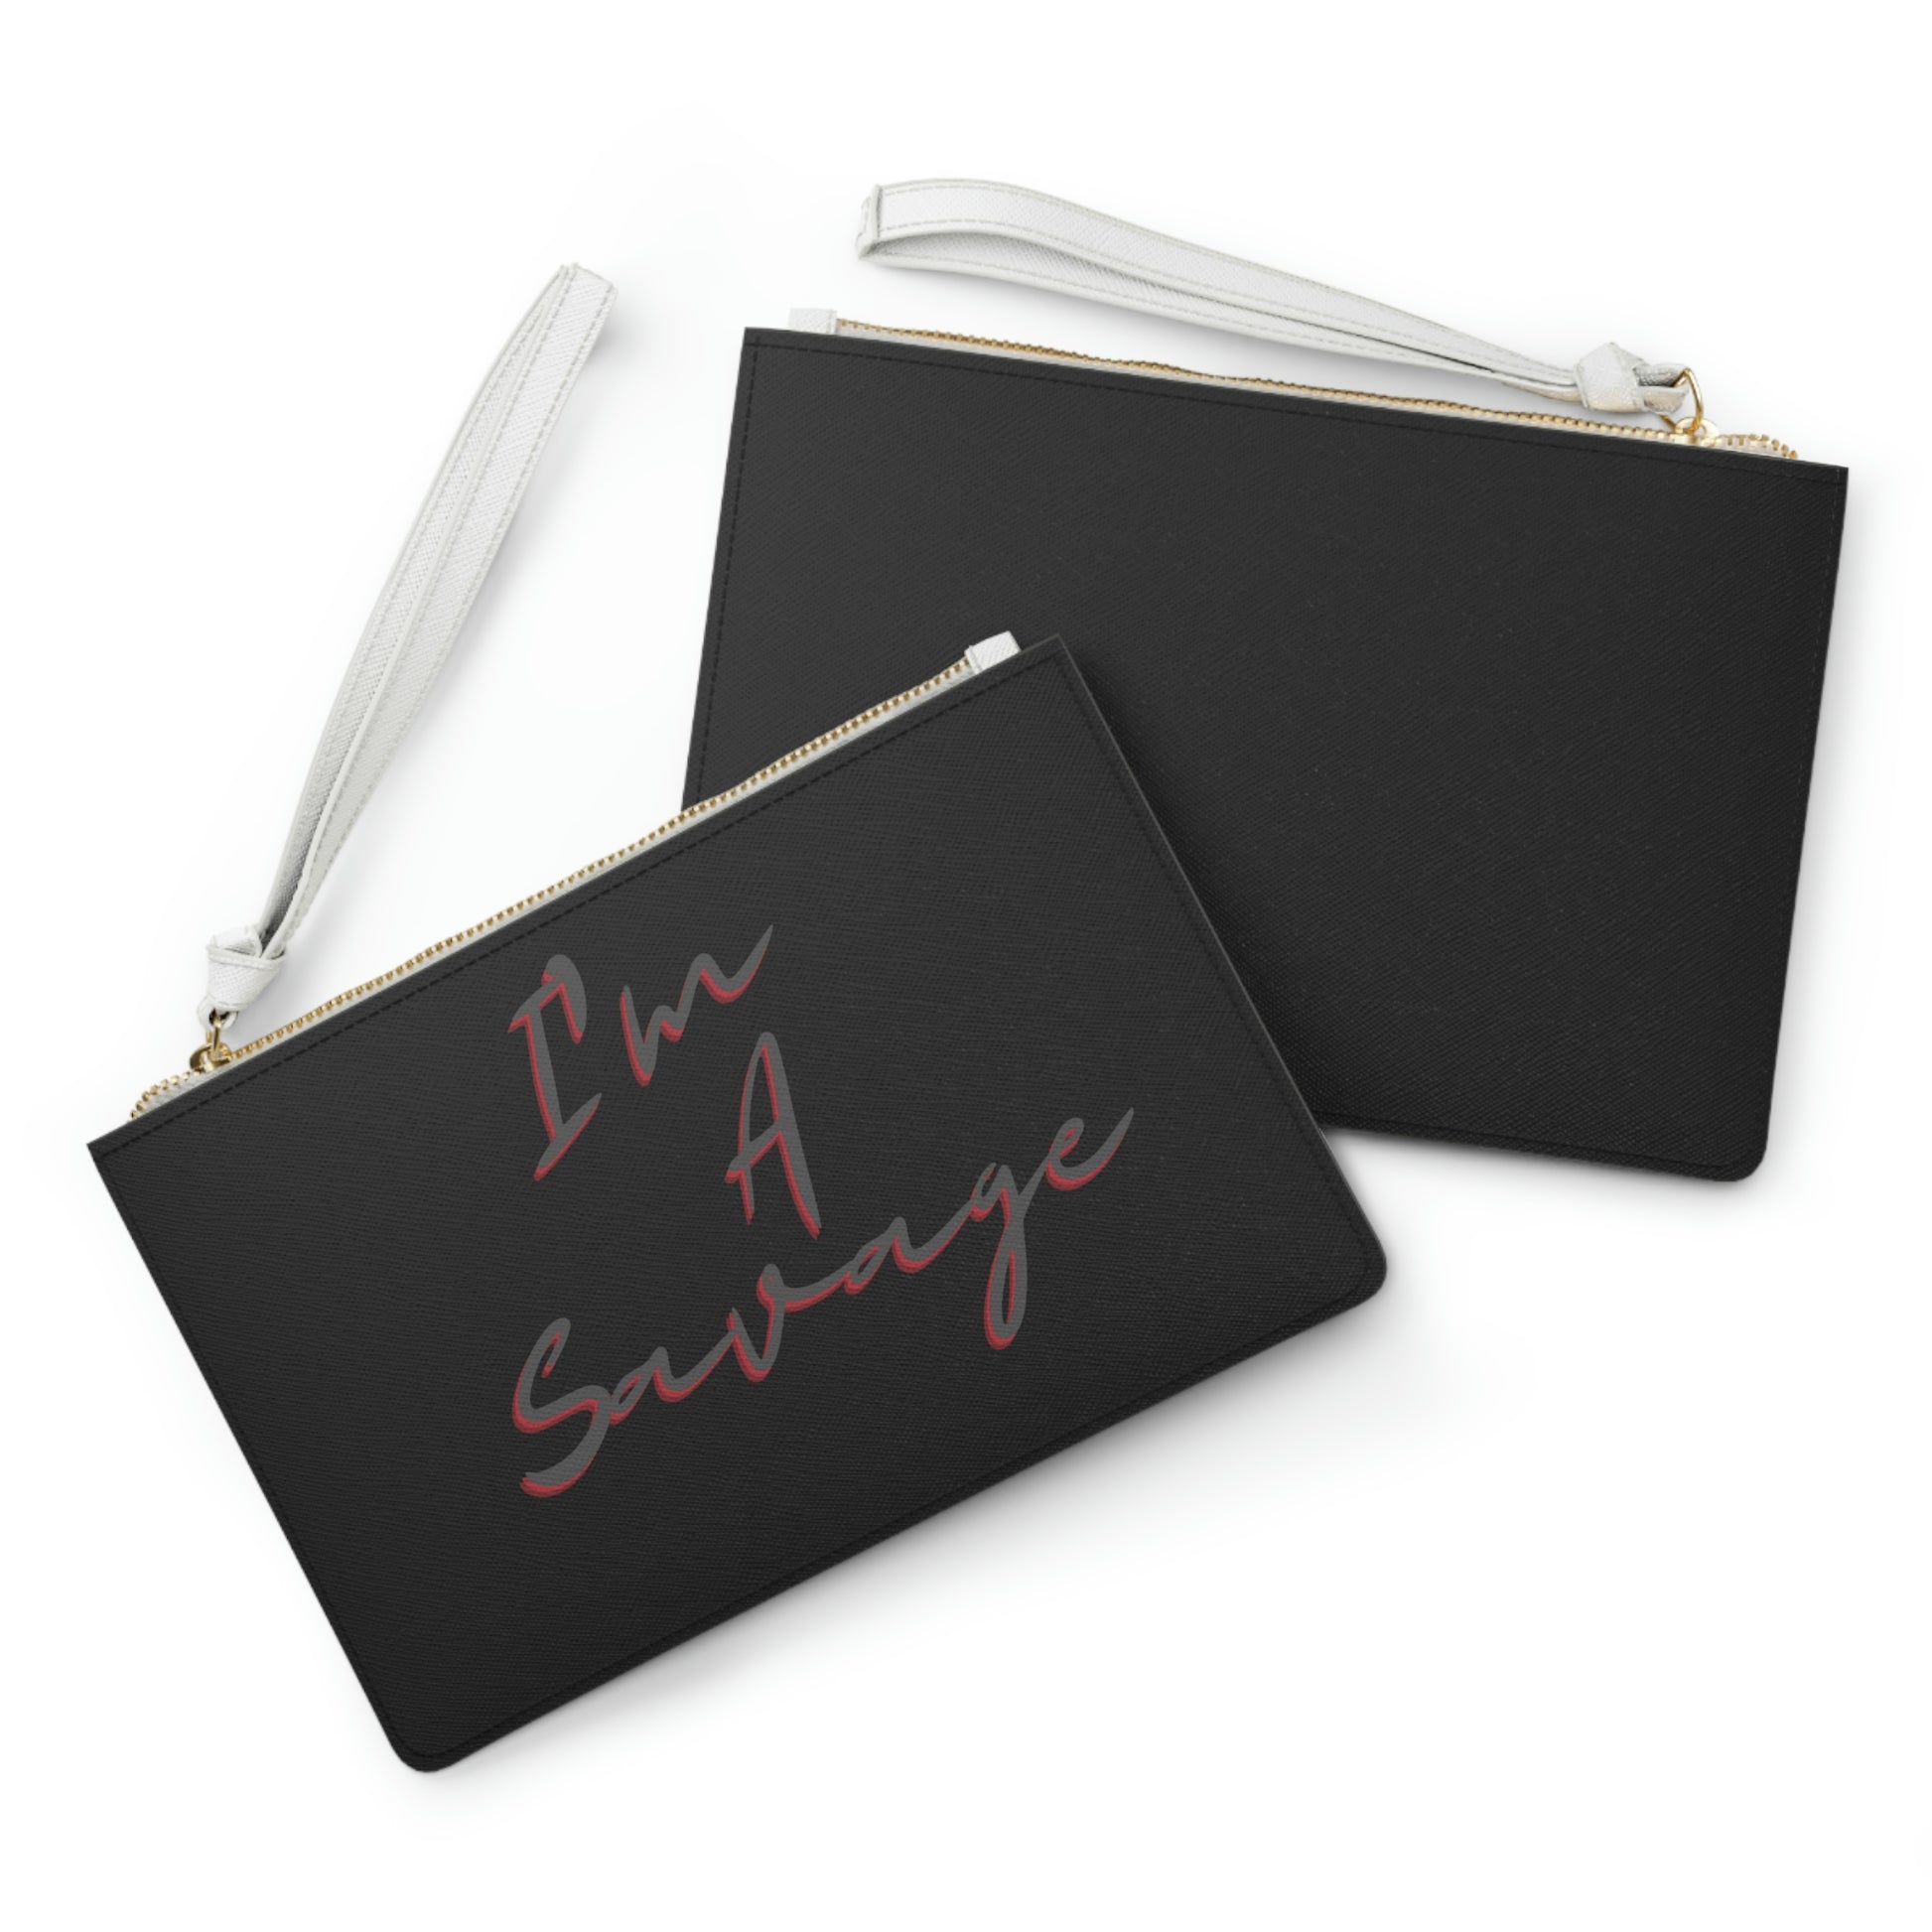 Savage Clutch Bag | BKLA | Shoes & Accessories | shoes, hats, phone covers, tote bags, clutch bags